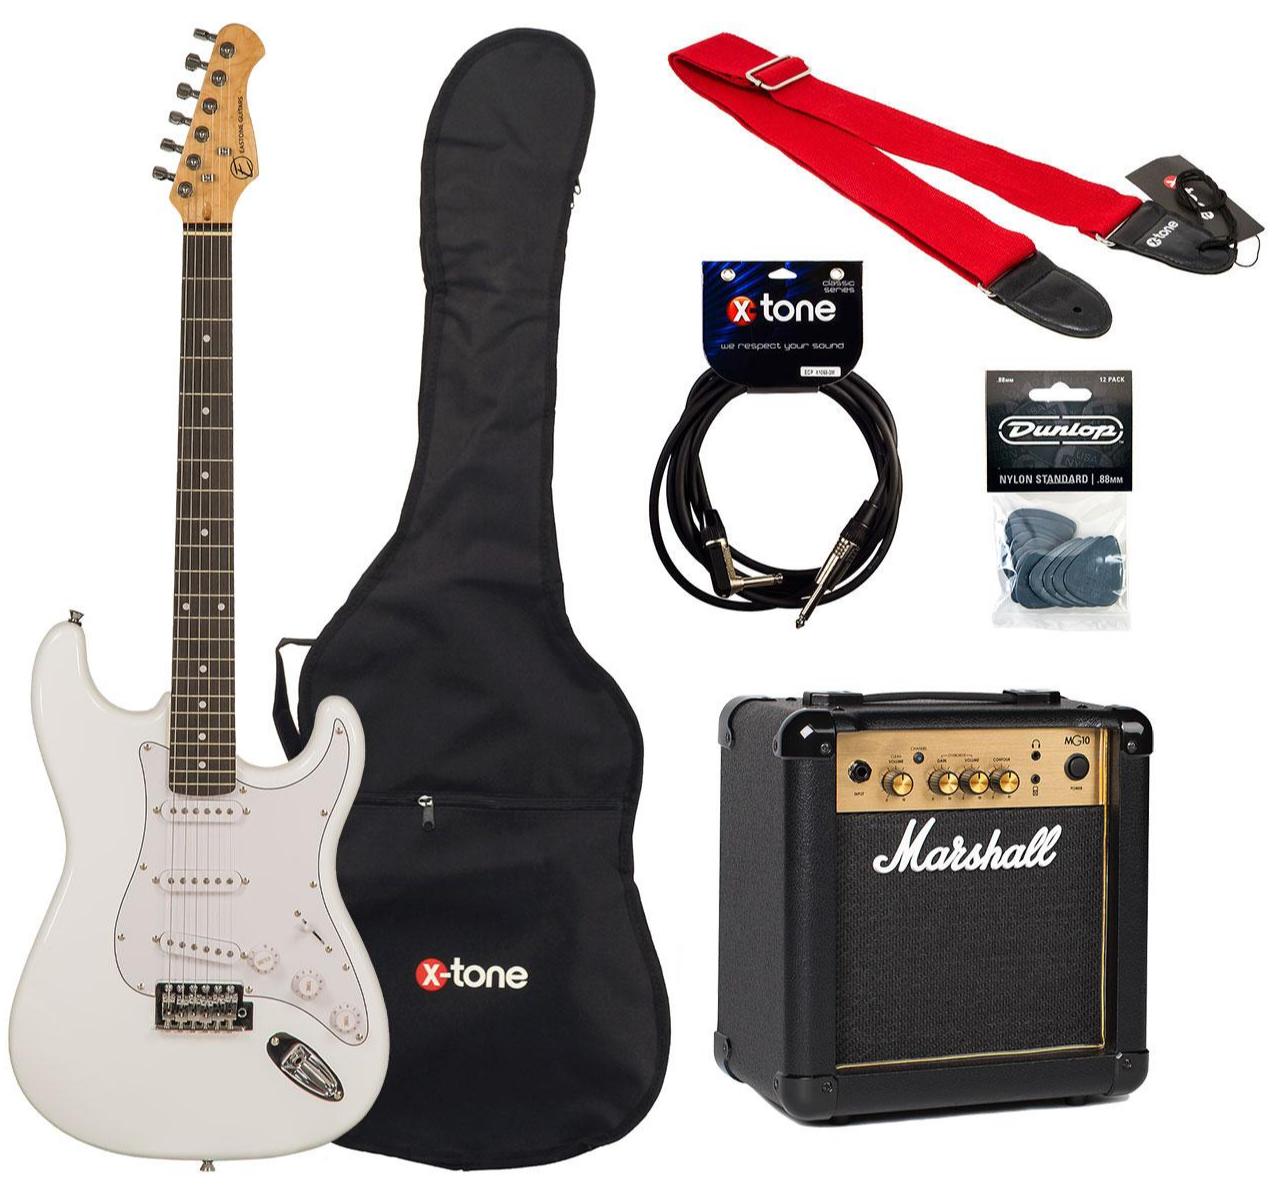 Pack guitare électrique Eastone STR70 +Marshall MG10G +Accessories - Olympic white